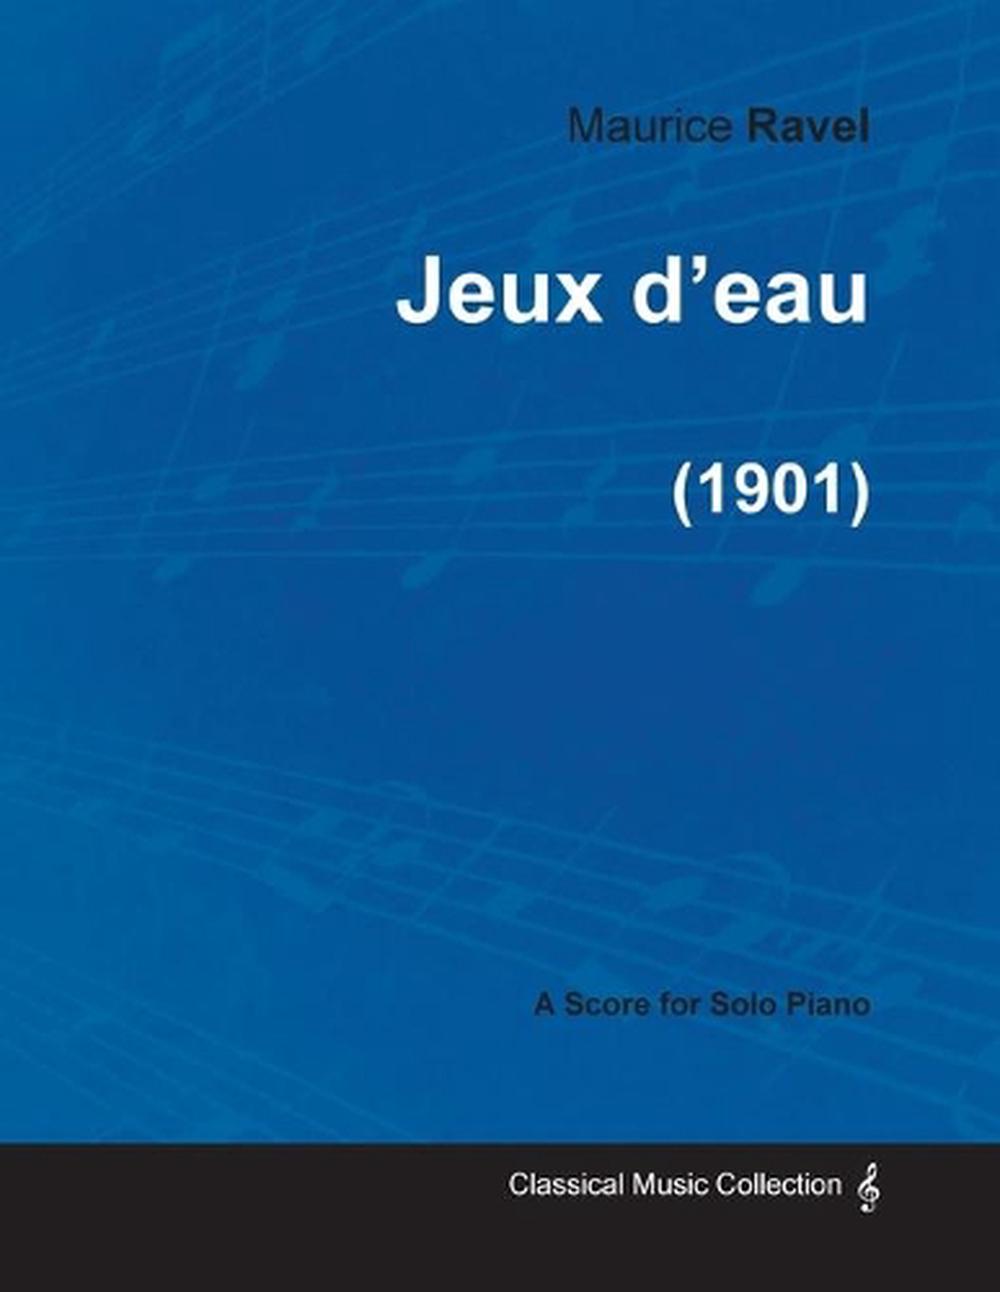 Jeux D'Eau - A Score for Solo Piano (1901) by Maurice Ravel (English